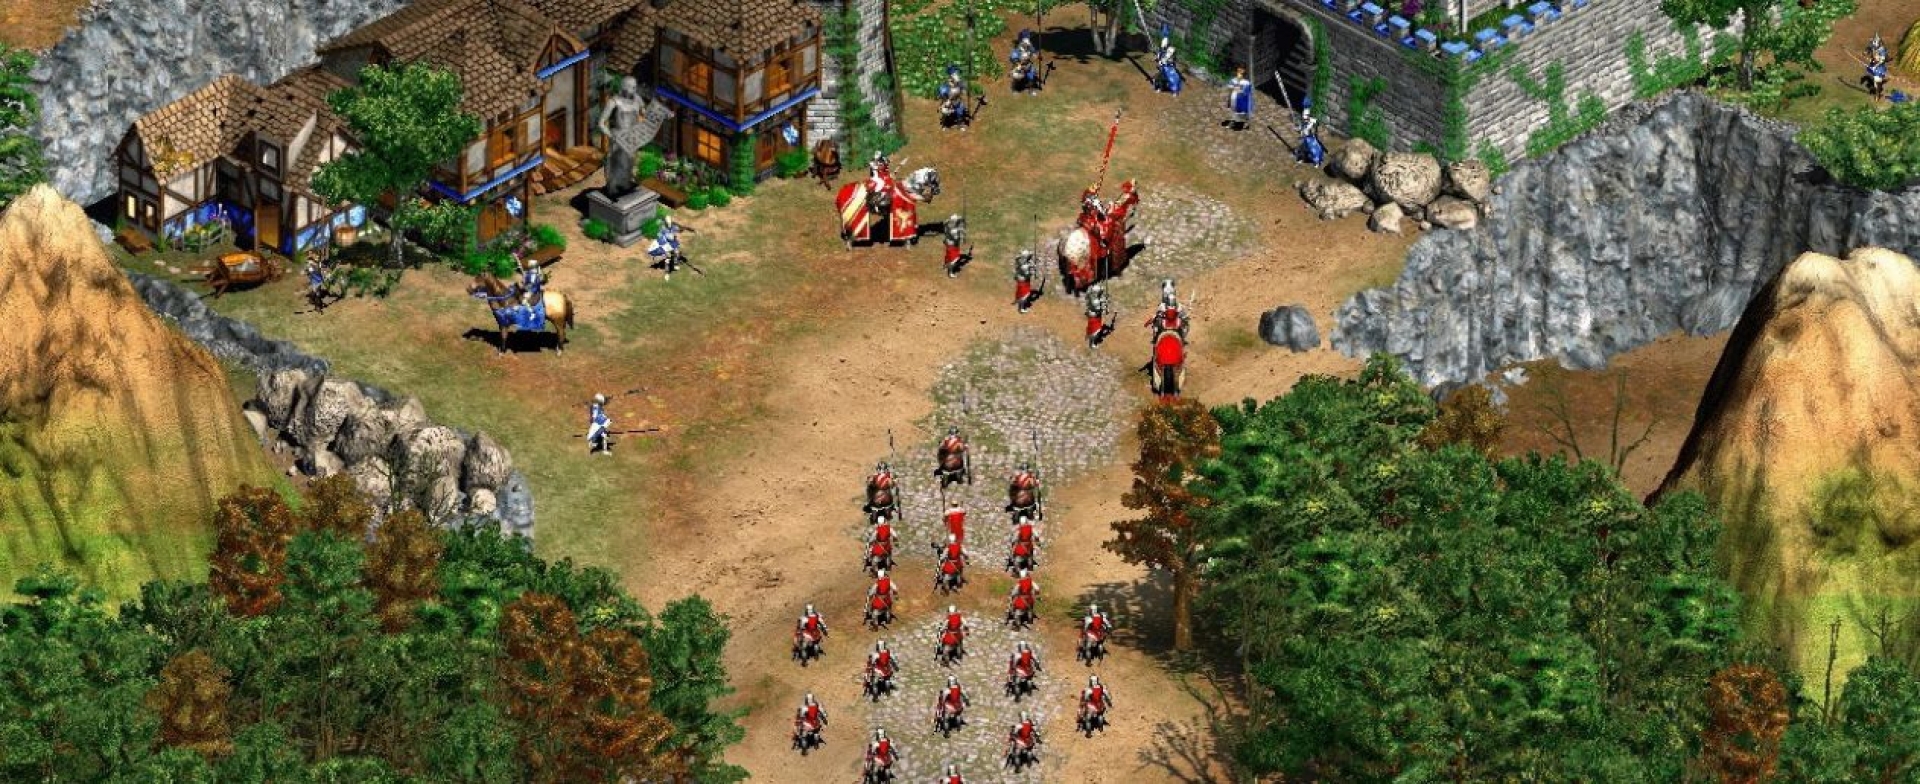 Age of Empires II forgotten units you should include in your strategy more